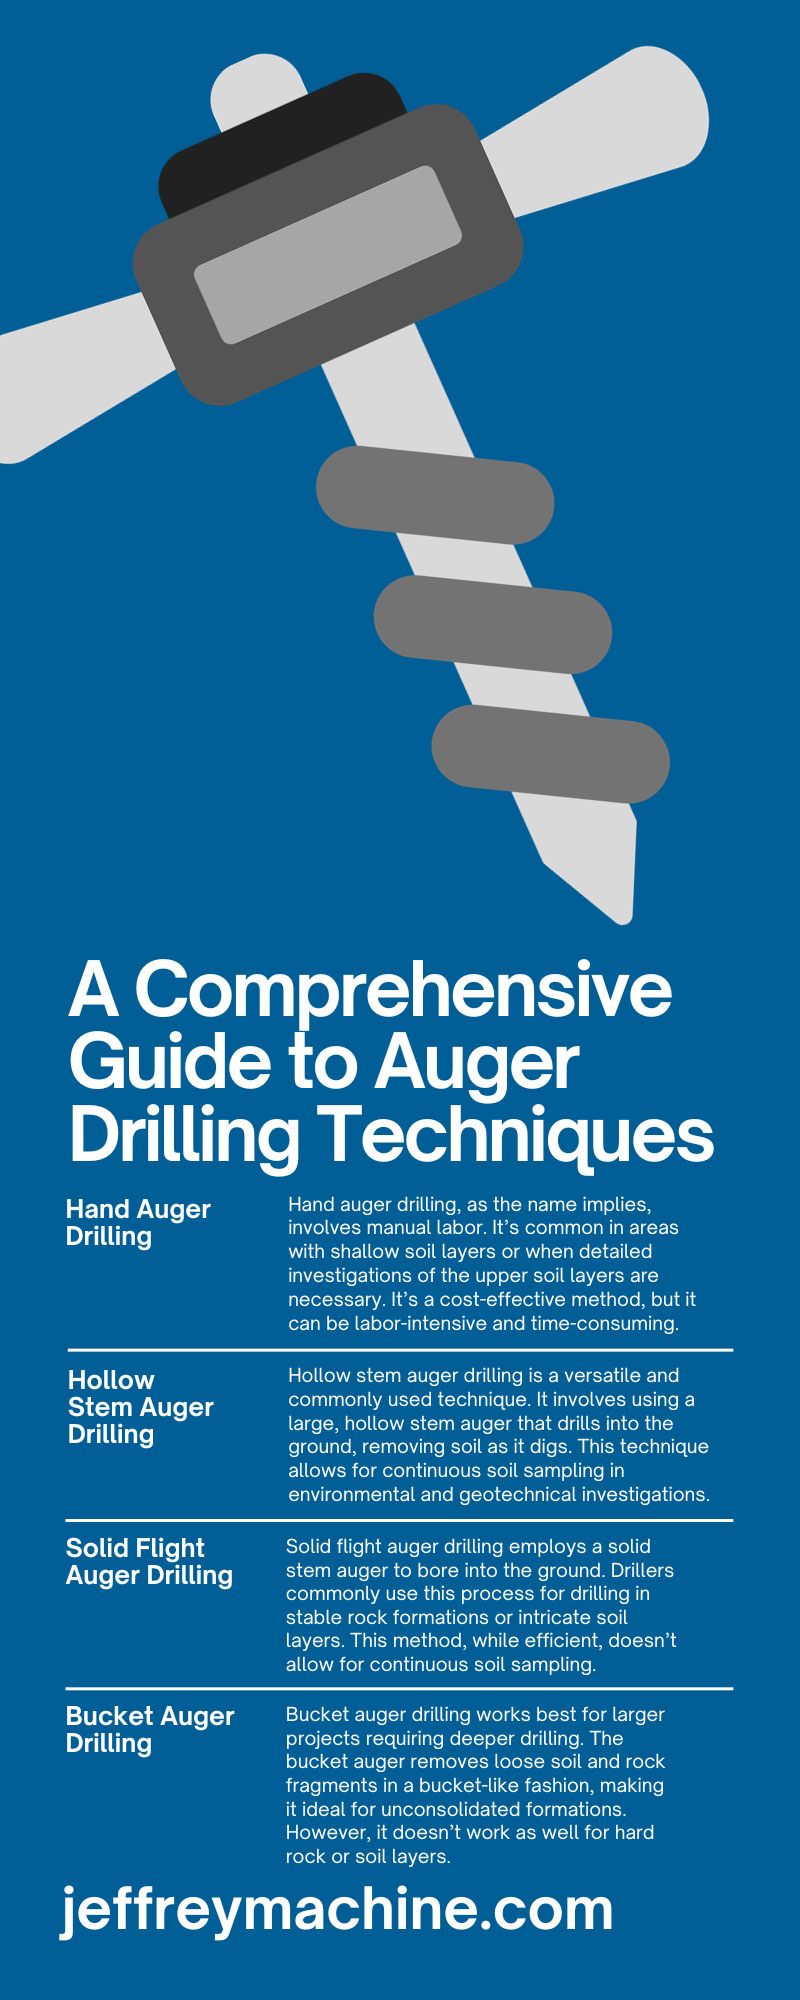 A Comprehensive Guide to Auger Drilling Techniques